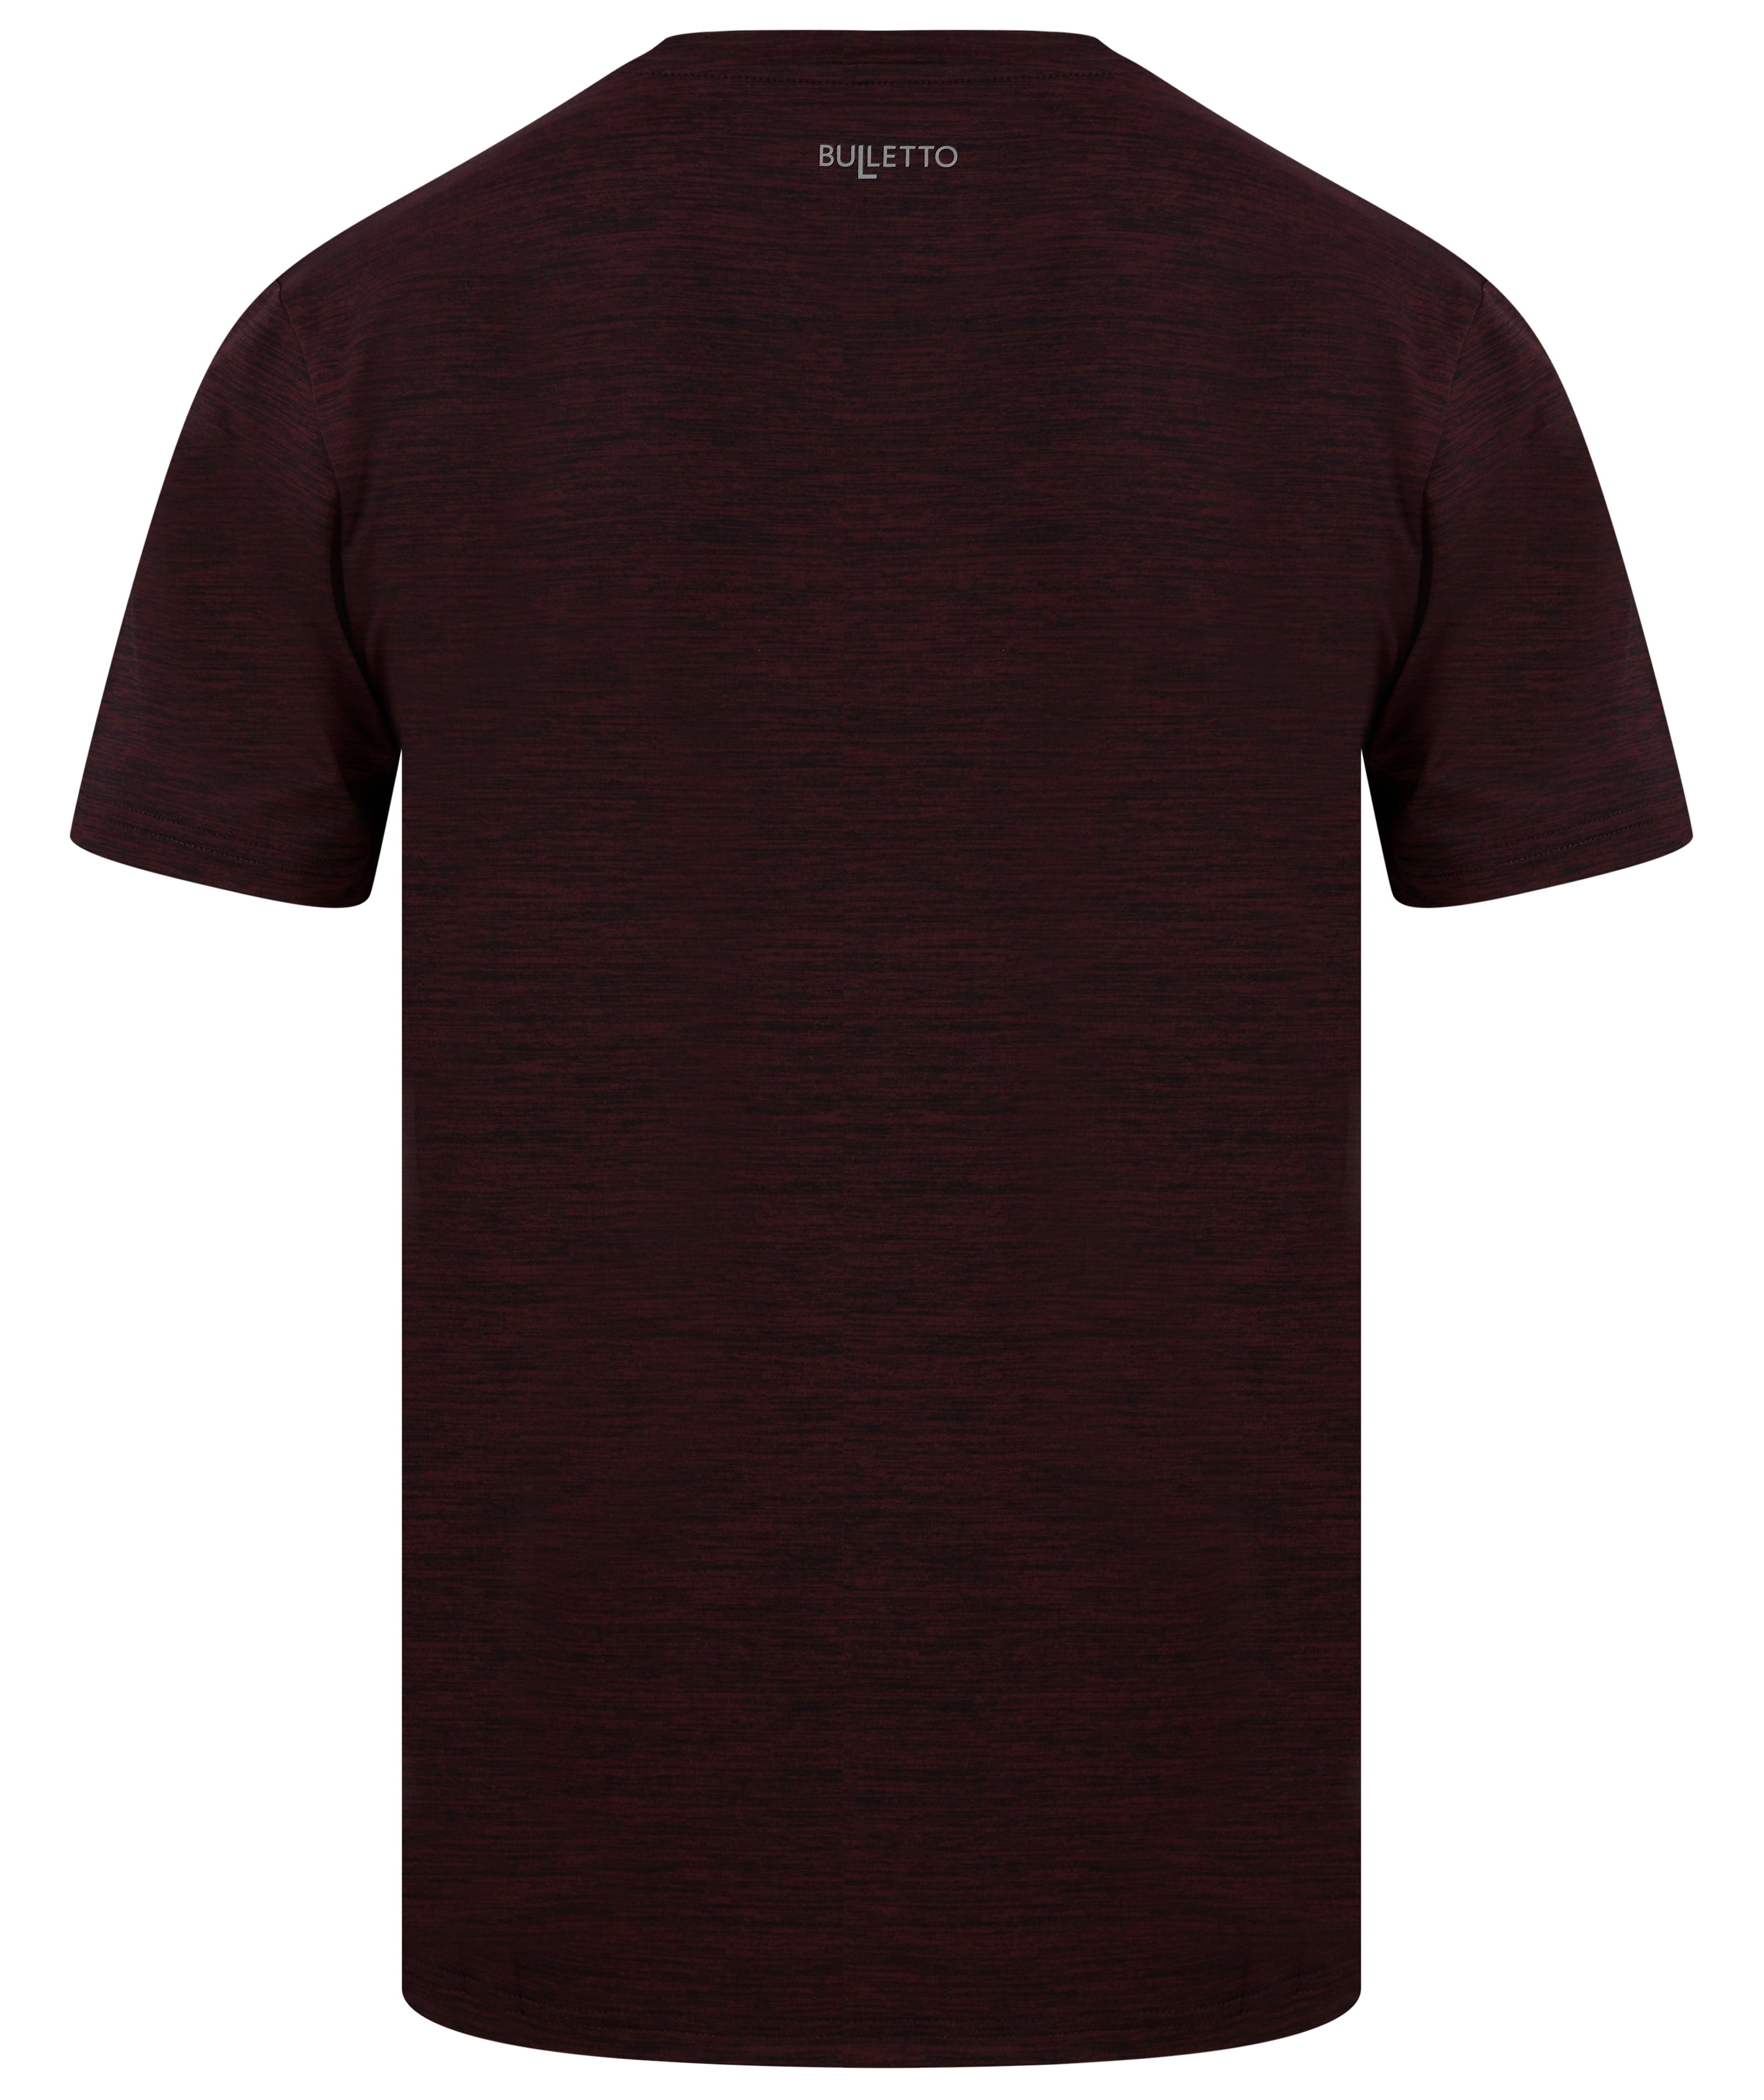 Load image into Gallery viewer, Bulletto Gym T Shirt Burgundy
